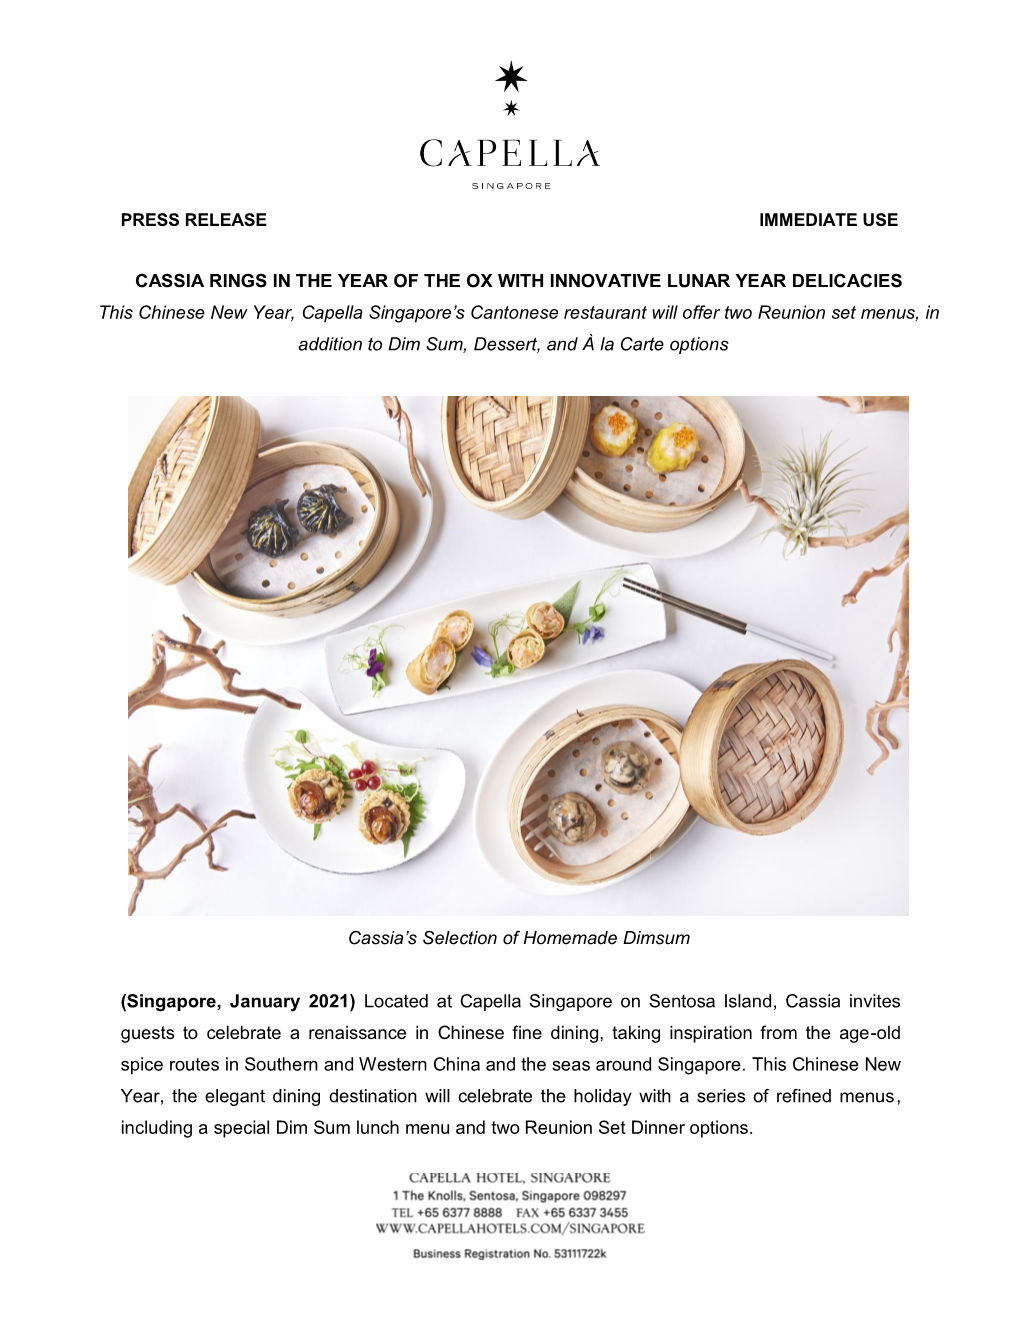 Cassia Rings in the Year of the Ox with Innovative Lunar Year Delicacies